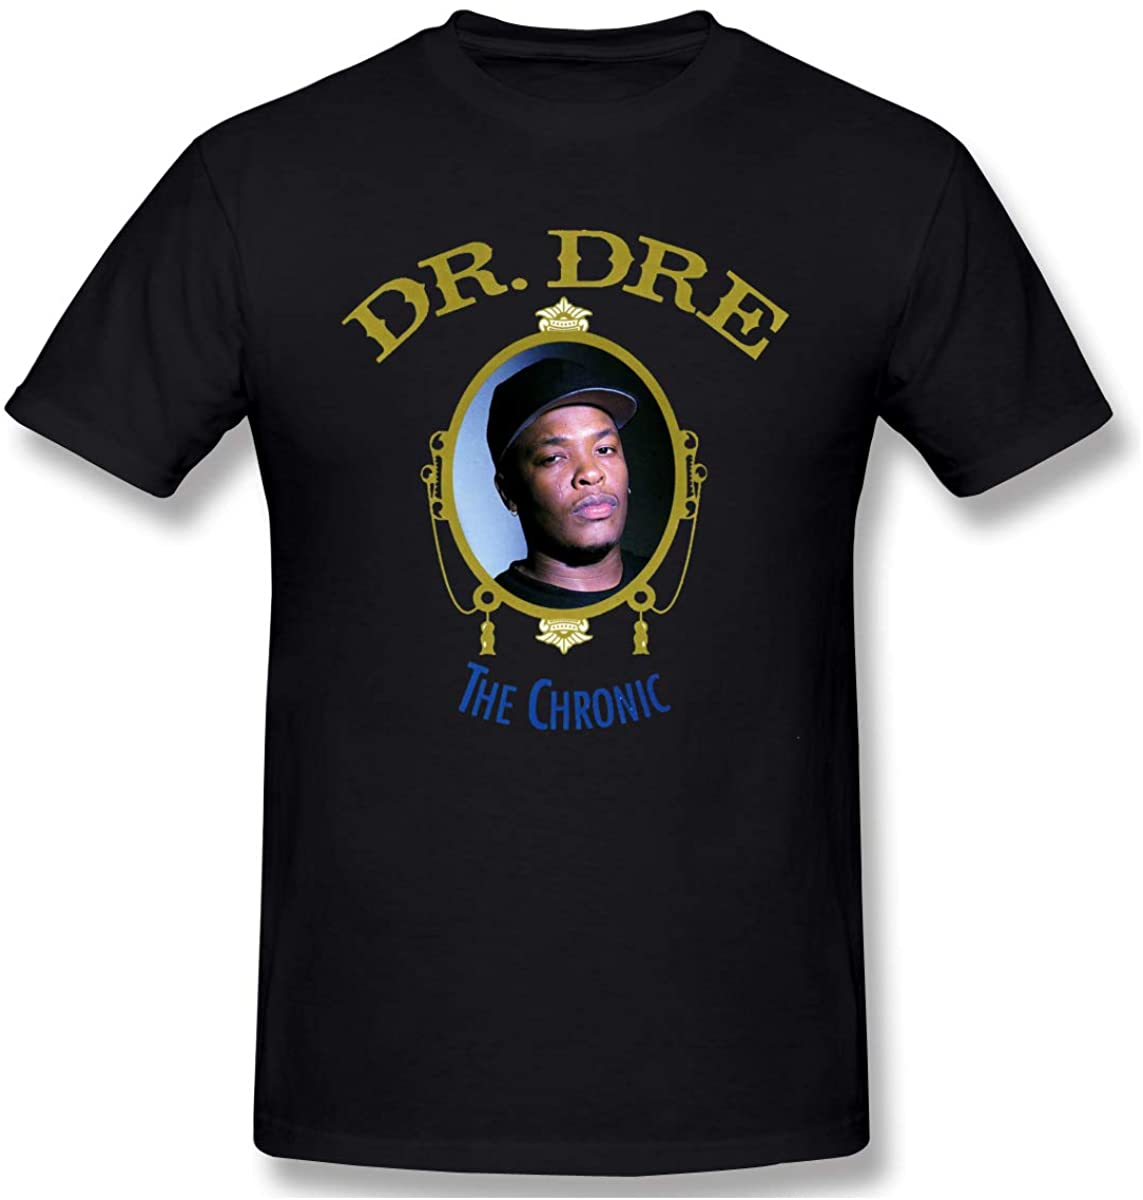 Digitwhale Male with Dr DRE The Chronic Design Running T ...